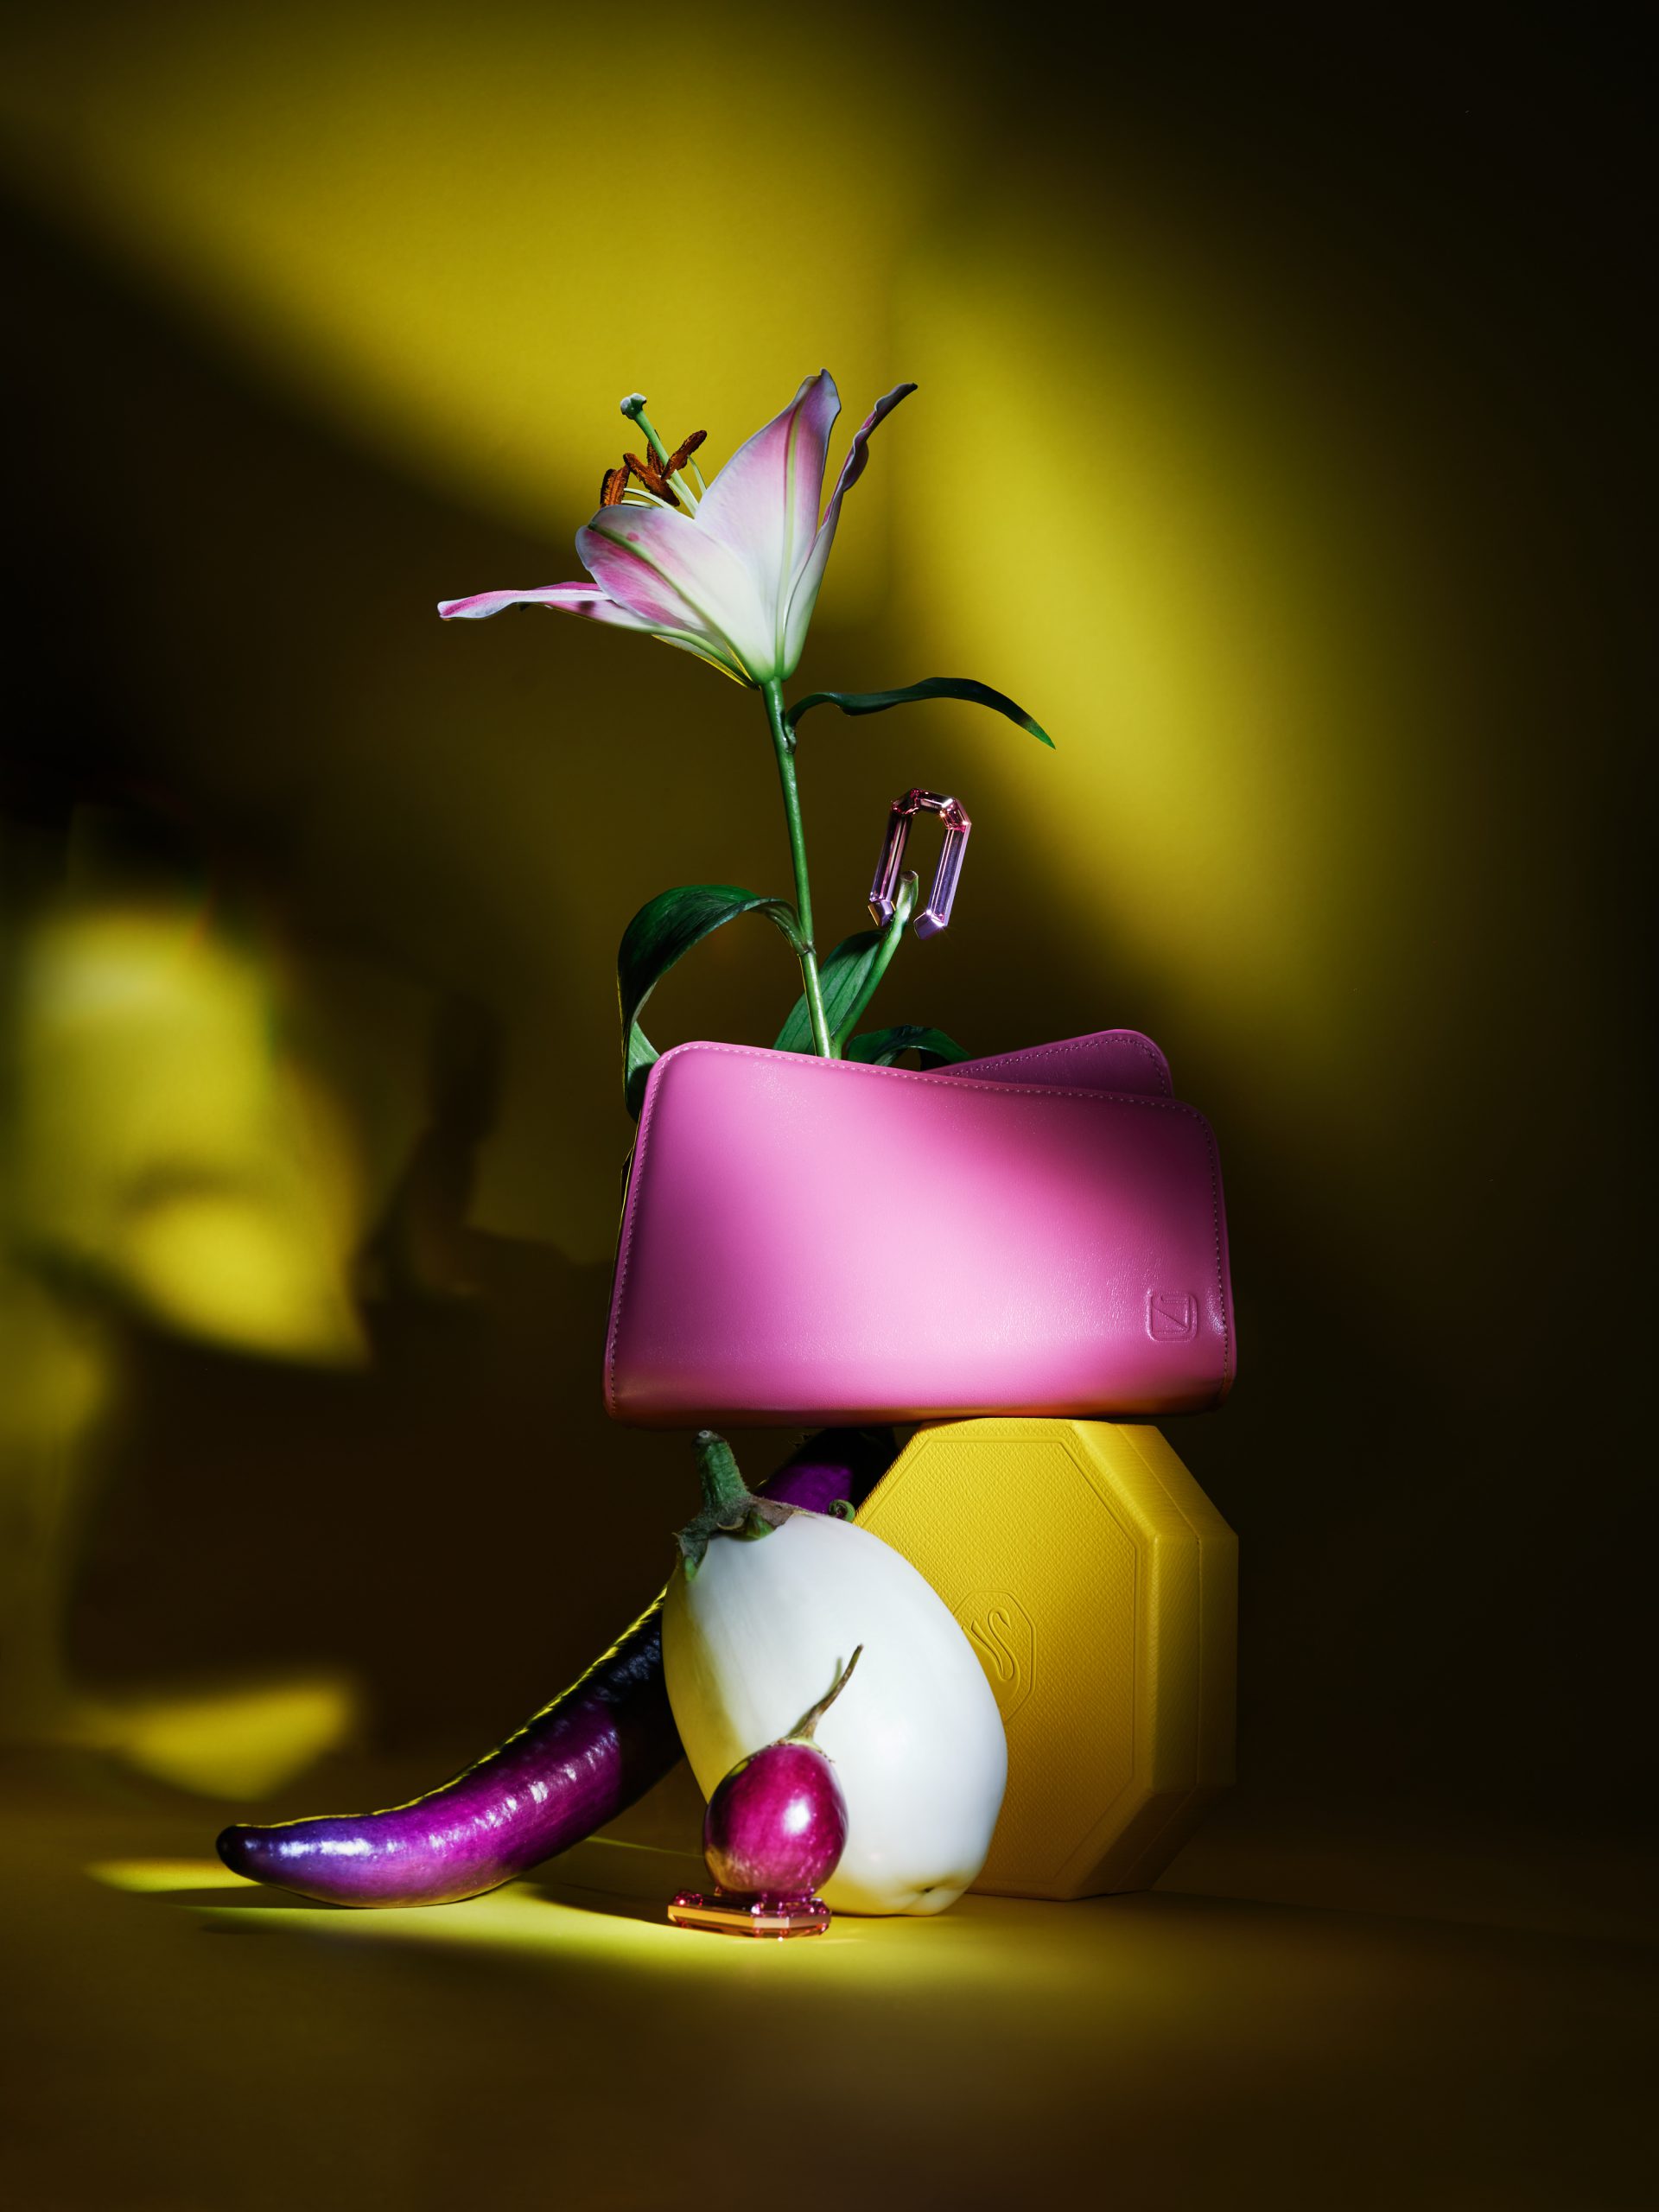 A stilllife photo with different vegetables, a Yuzefi handbag and Swarovski earrings.